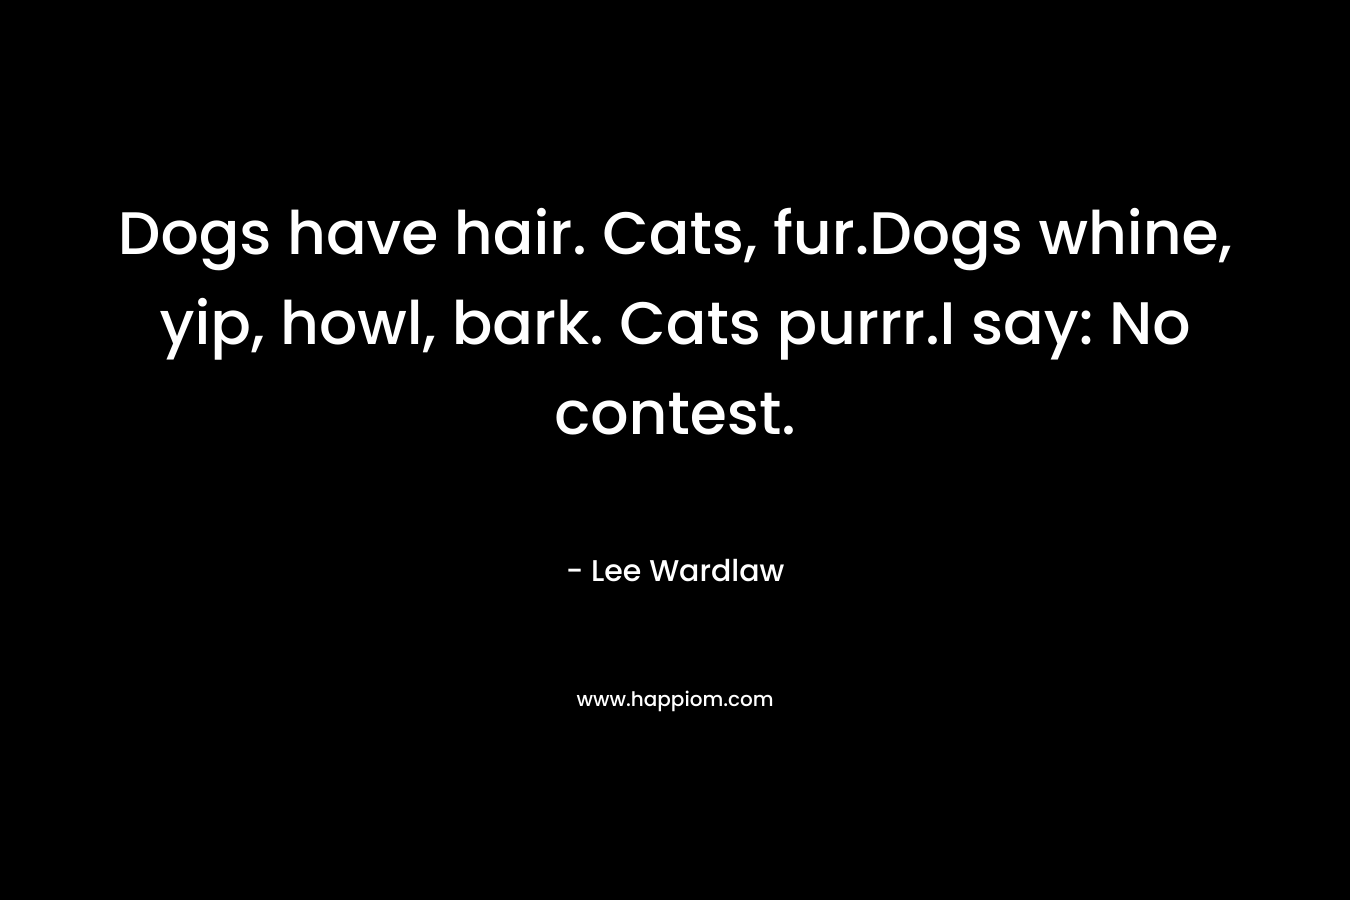 Dogs have hair. Cats, fur.Dogs whine, yip, howl, bark. Cats purrr.I say: No contest. – Lee Wardlaw